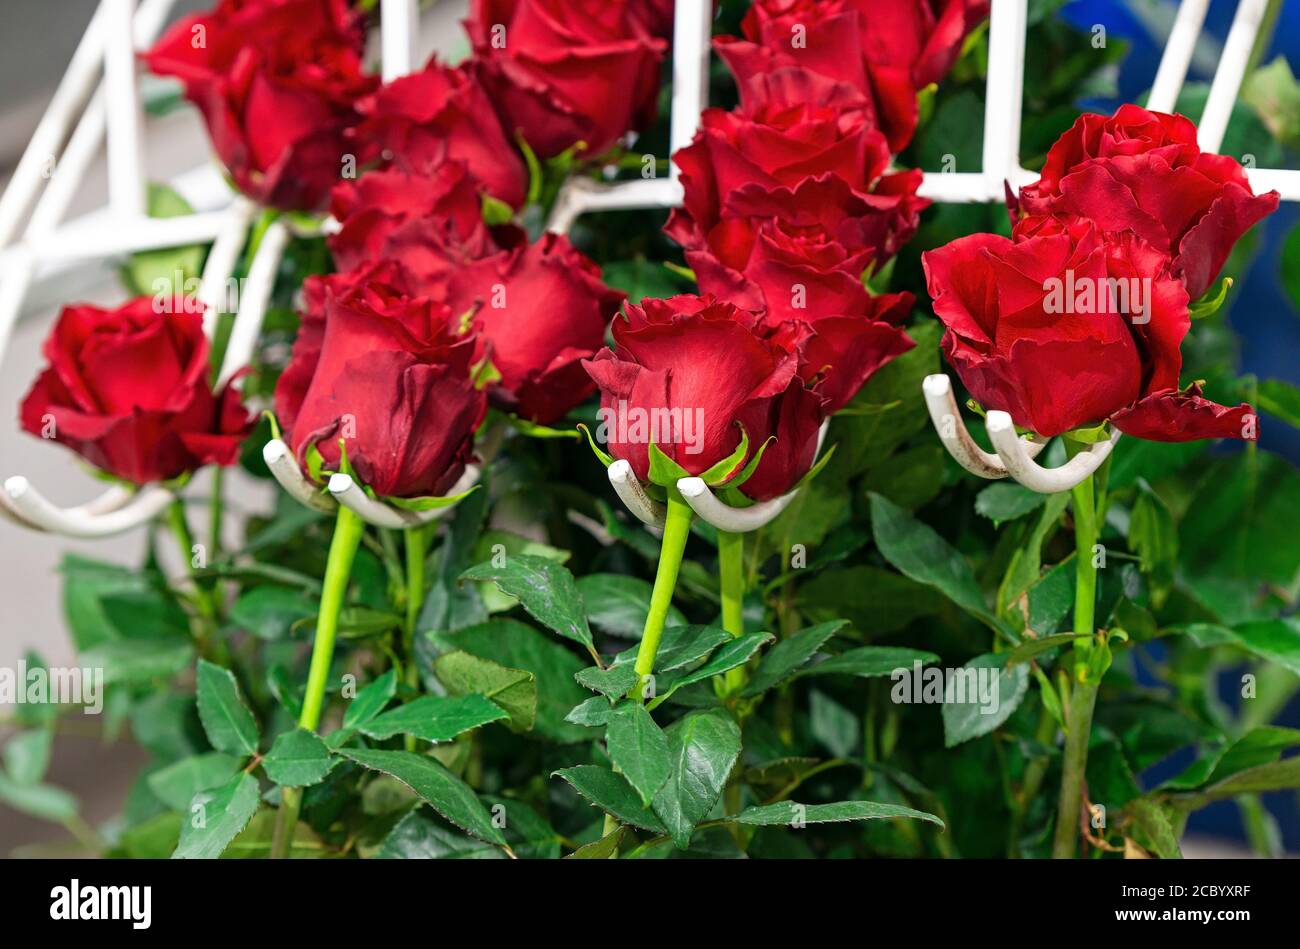 Red roses, the ecuadorian national flower, in the production line for size classification, Cayambe, North of Quito, Ecuador. Stock Photo